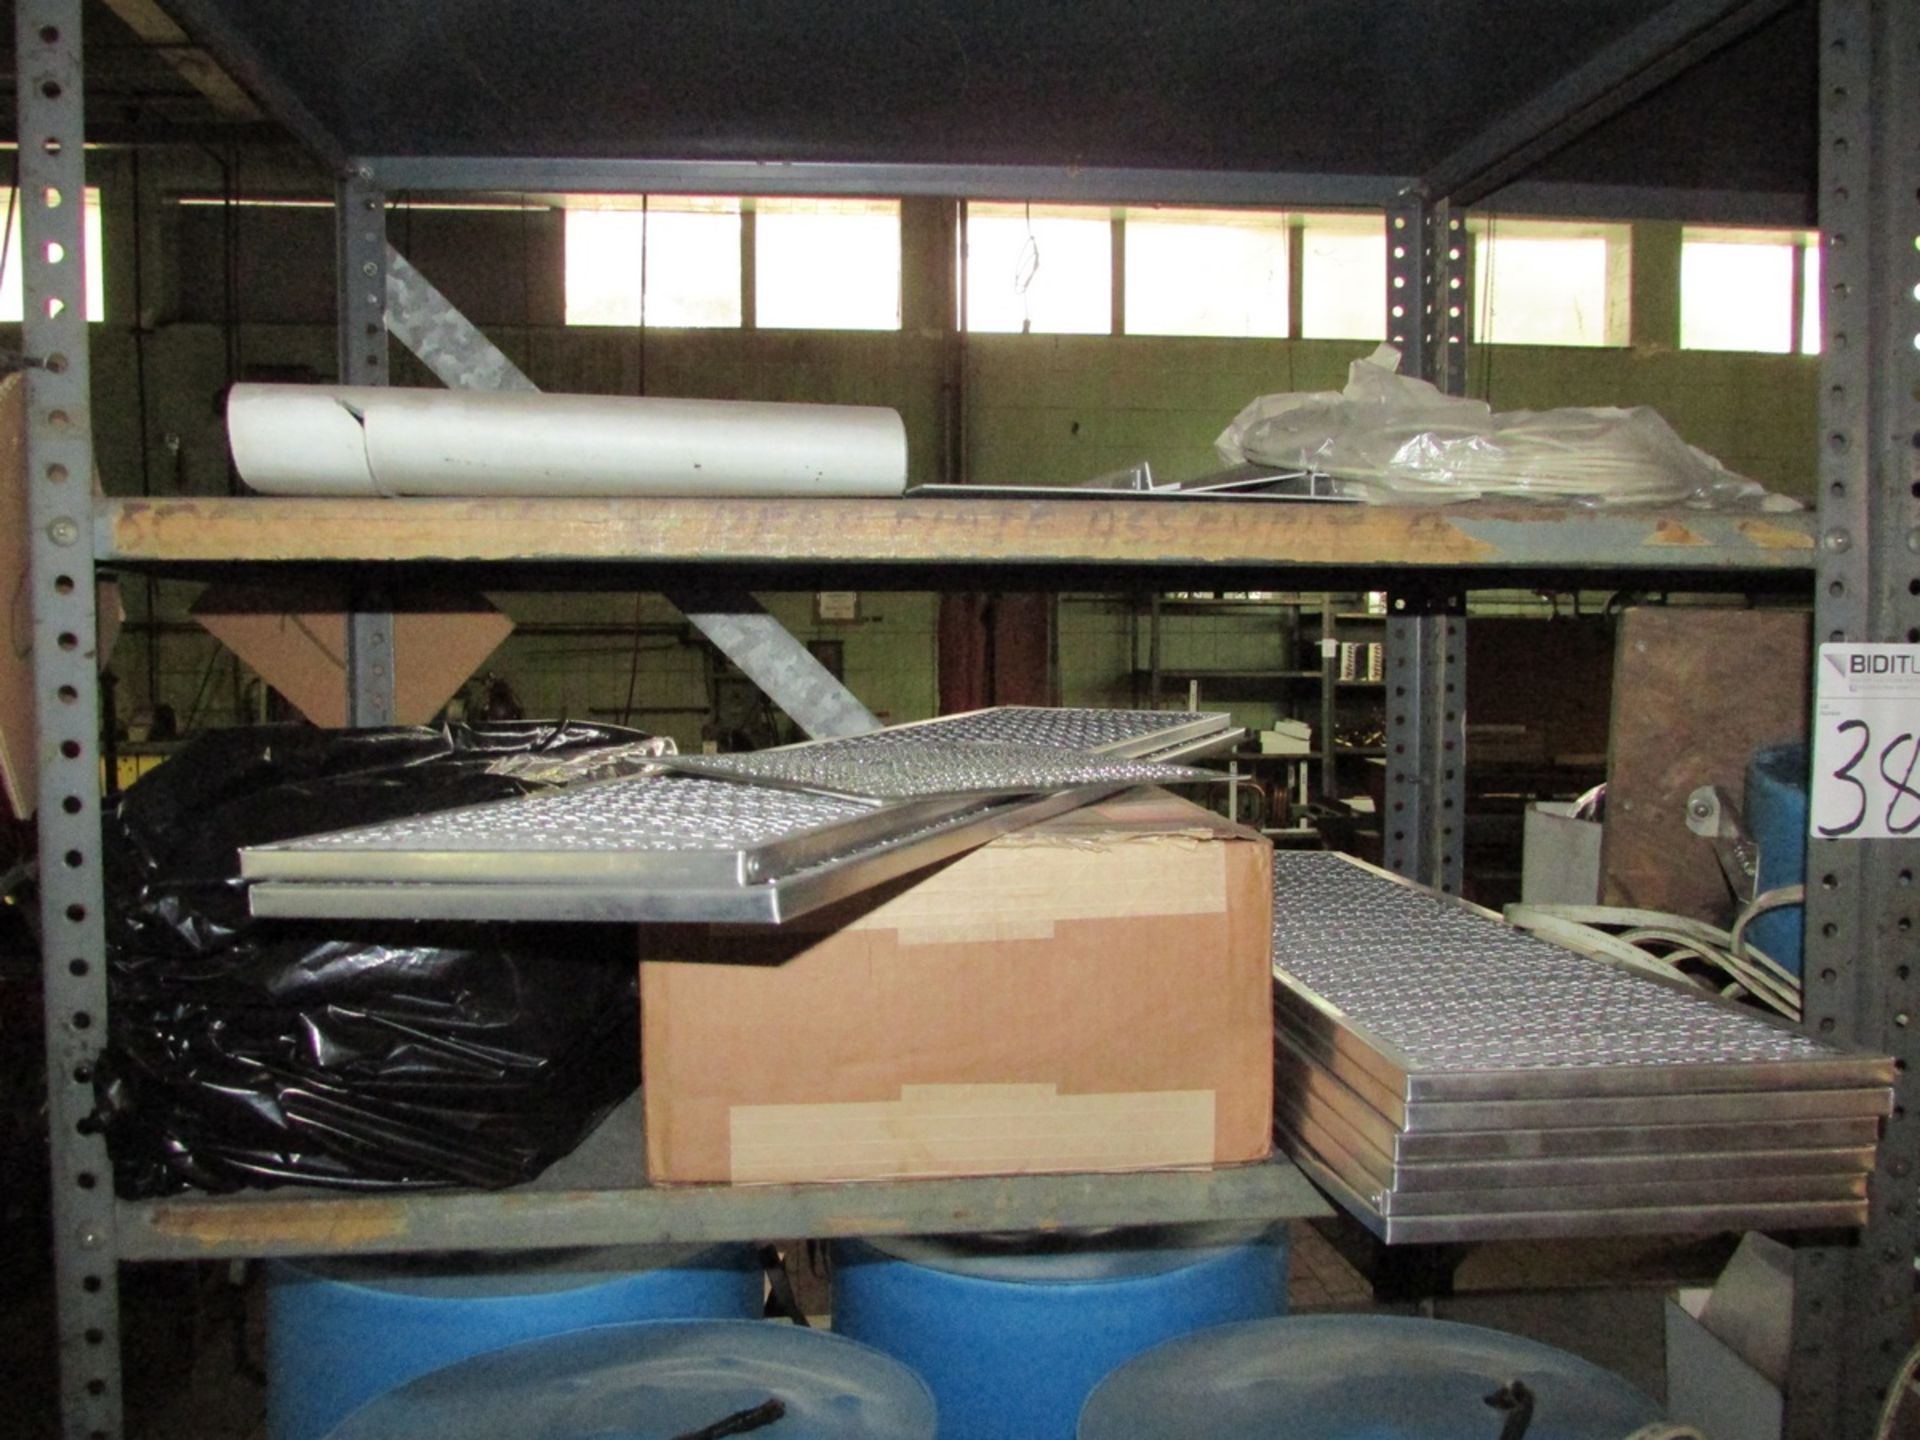 Contents of AC Assembly Area, To Include (7) Double Sided Wood Workstations, (28) Sections of - Image 19 of 107